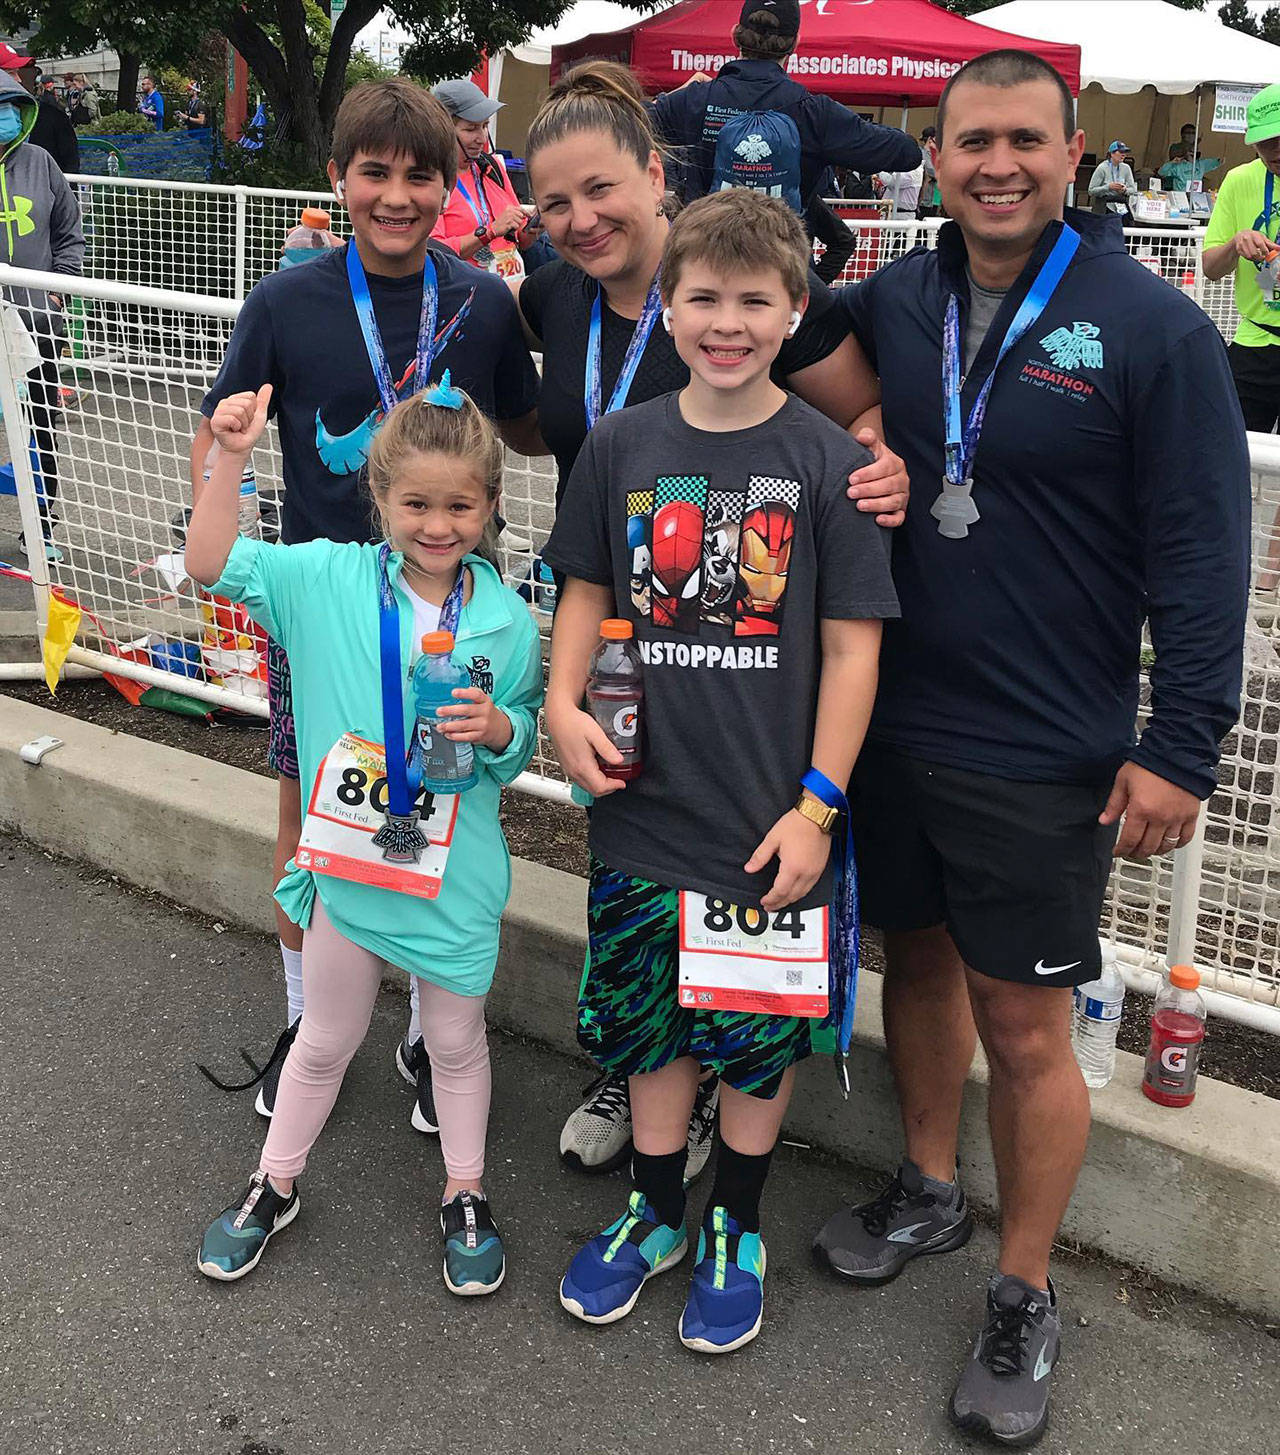 The Laboy family of Sequim celebrates finishing the North Olympic Discovery Marathon after they collaborated to finish the 26.2-mile course as a relay team. Pictured are (back row, from left) Bryant, Mary and Dennis, with (front row) Gabby and Jackson. Photo courtesy of Laboy family